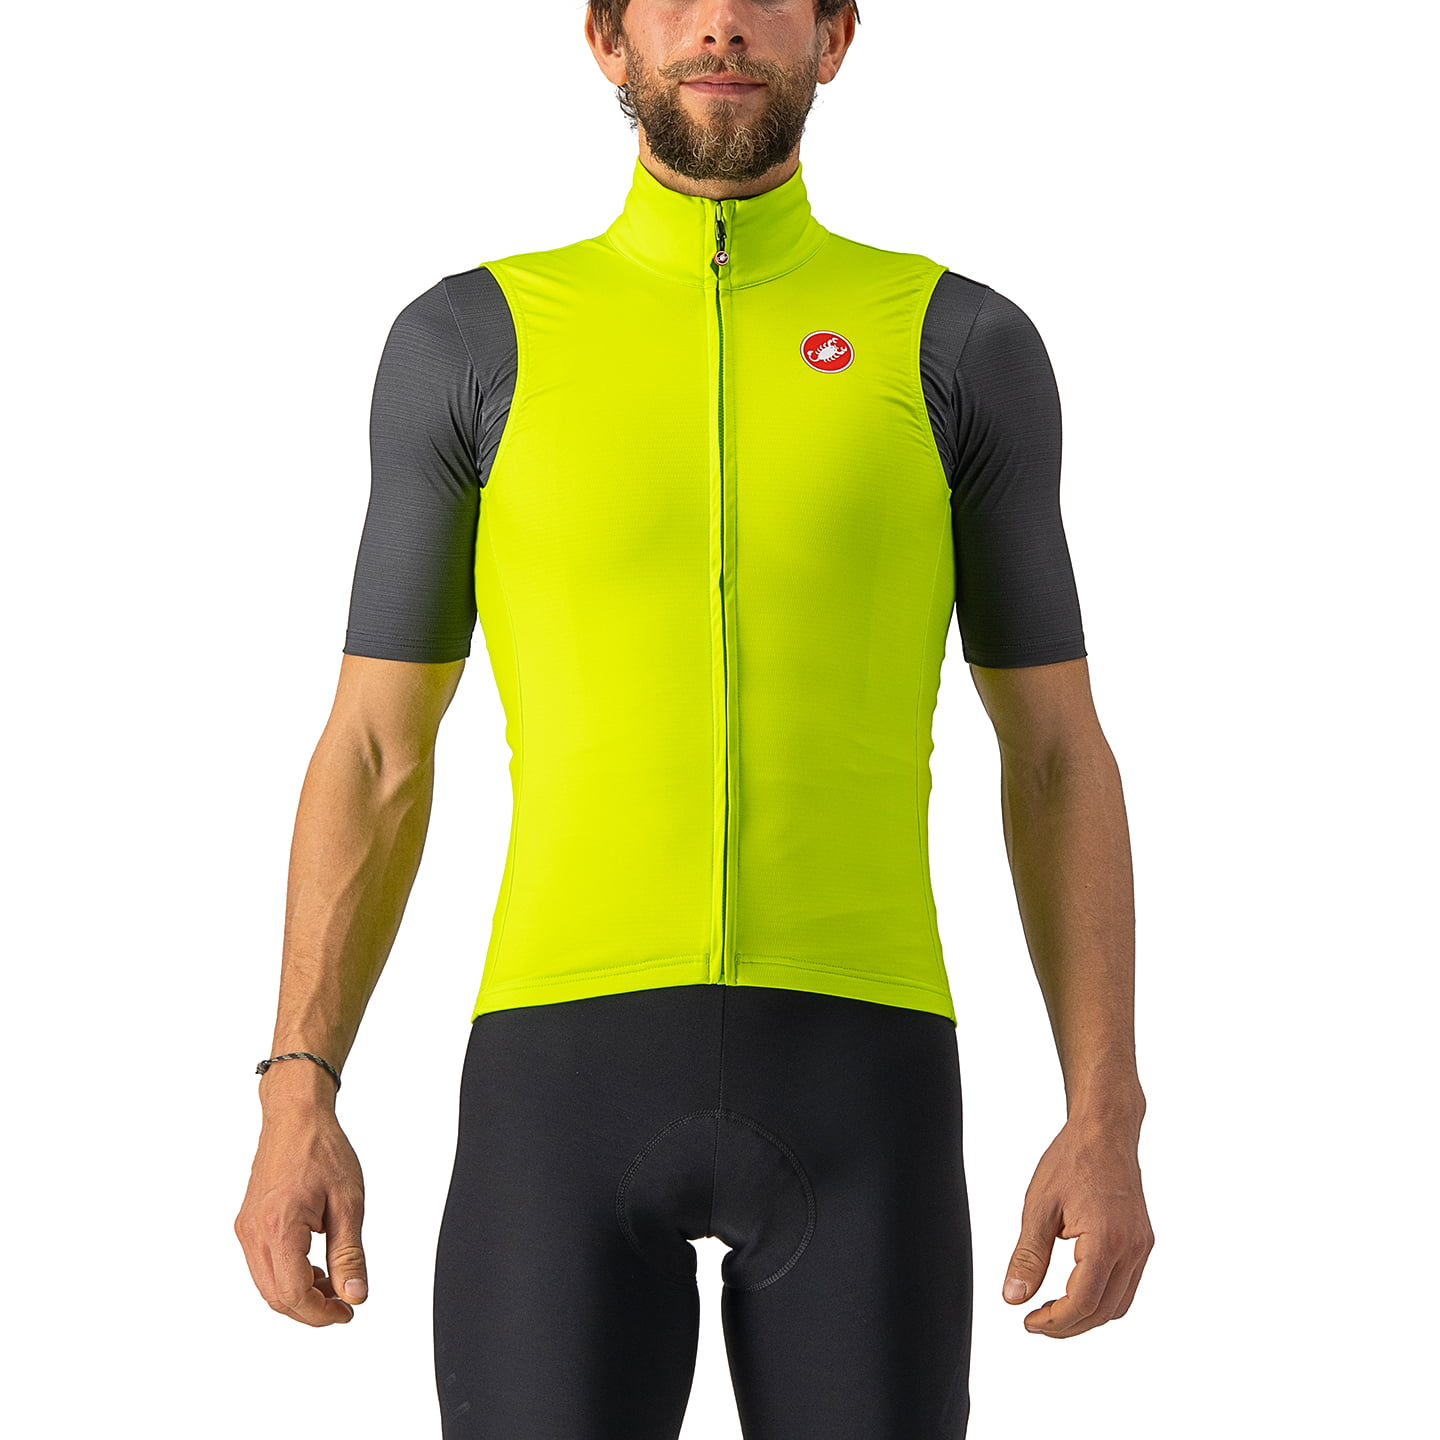 Thermal Pro Mid Thermal Vest Thermal Vest, for men, size XL, Cycling vest, Cycling clothing